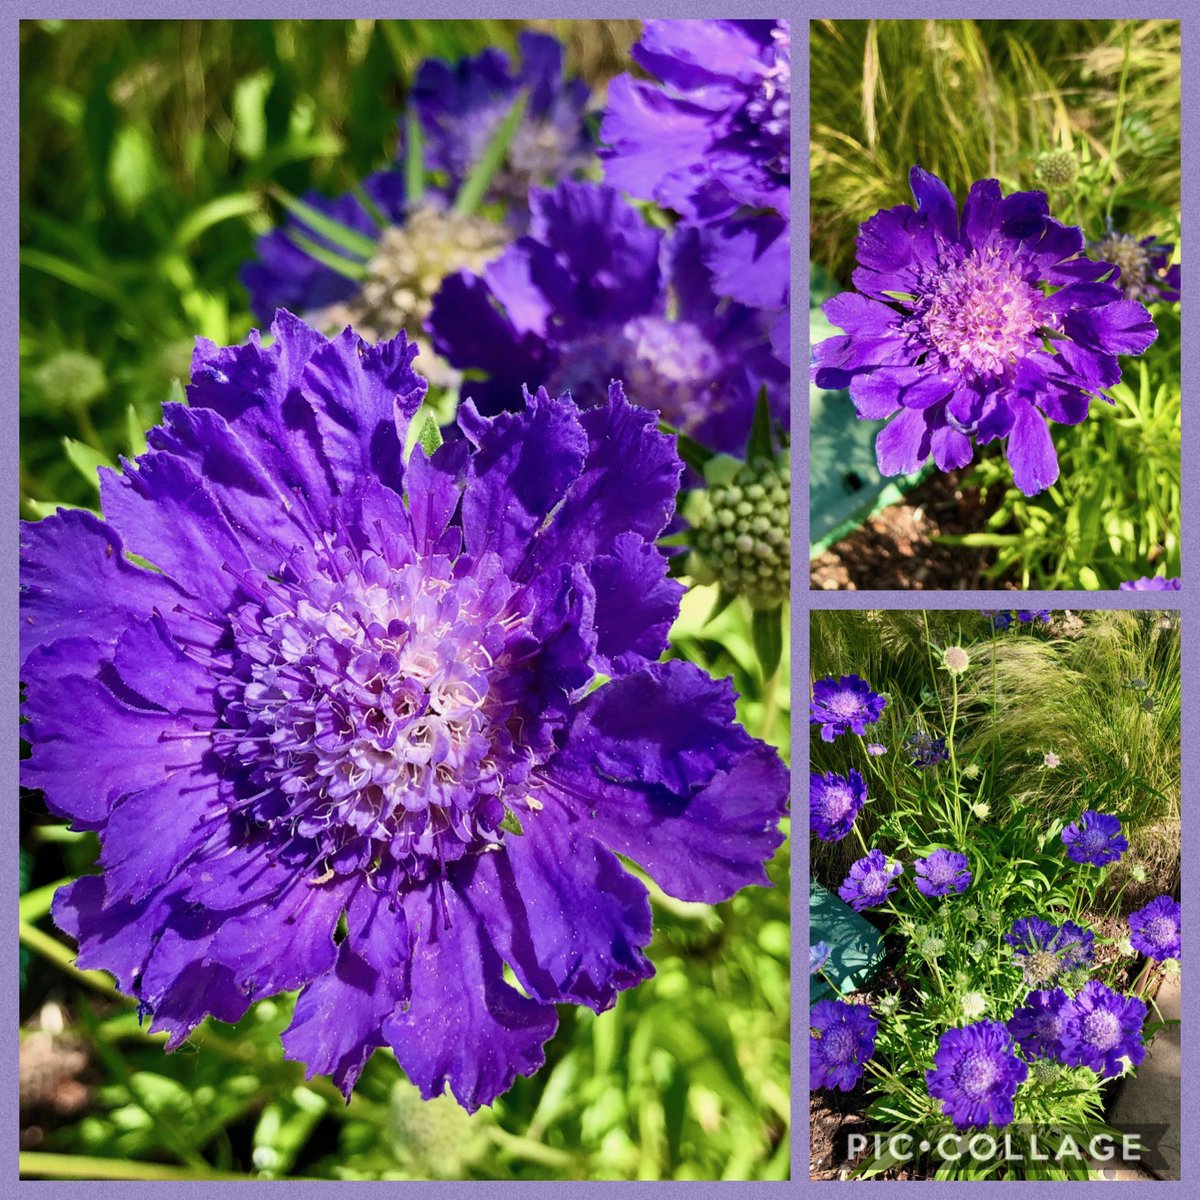 Pincushion Flower (Scabiosa caucasica 'Fama Deep Blue') @redbuttegarden  Is more intense purple than blue to me. The 4' across flowers definitely get your attention though. Great cut flower & beloved by bees. 
#Gardening #perennial #cutflower 
Member of the #Caprifoliaceae family